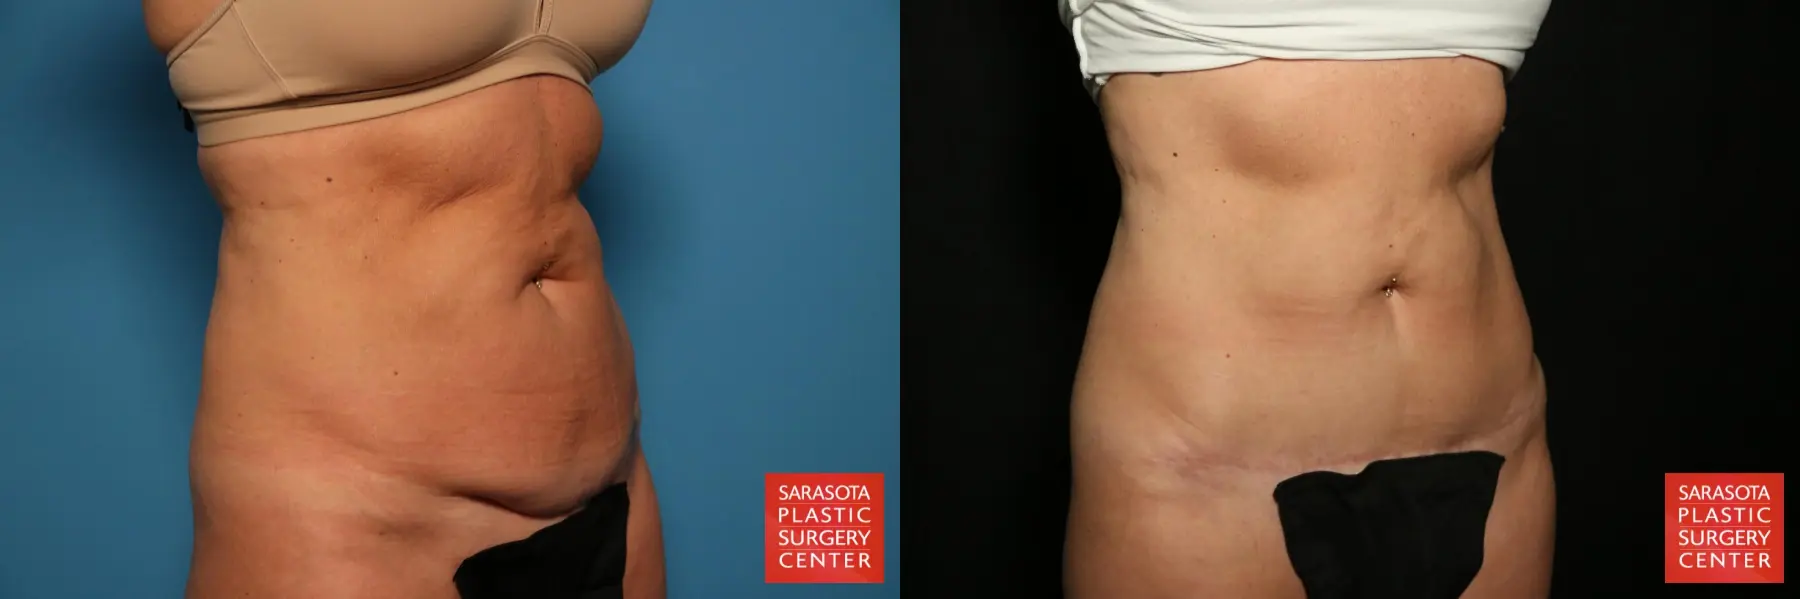 Mini Tummy Tuck: Patient 1 - Before and After 2